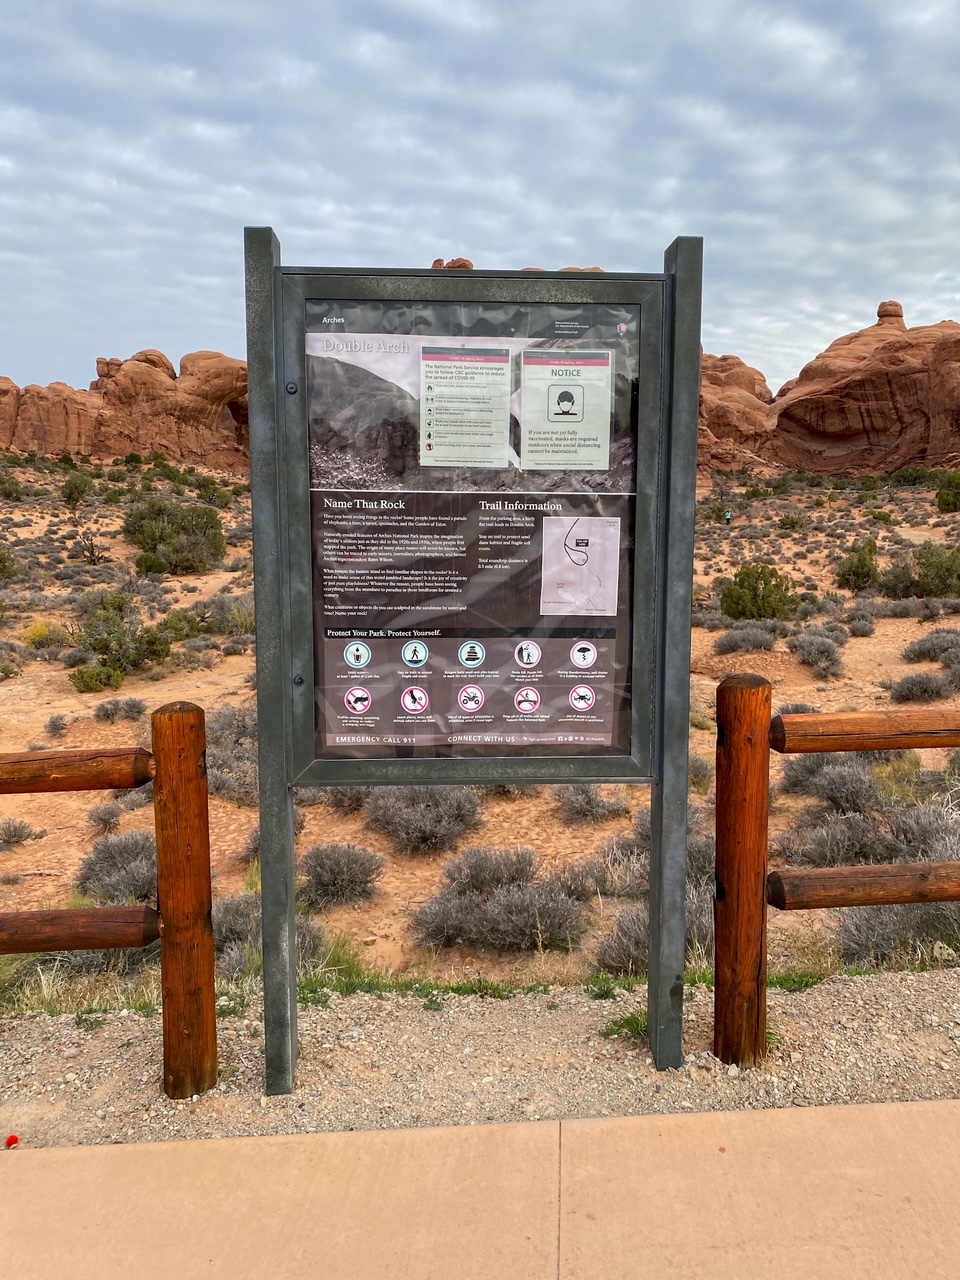 the Double Arch Trailhead